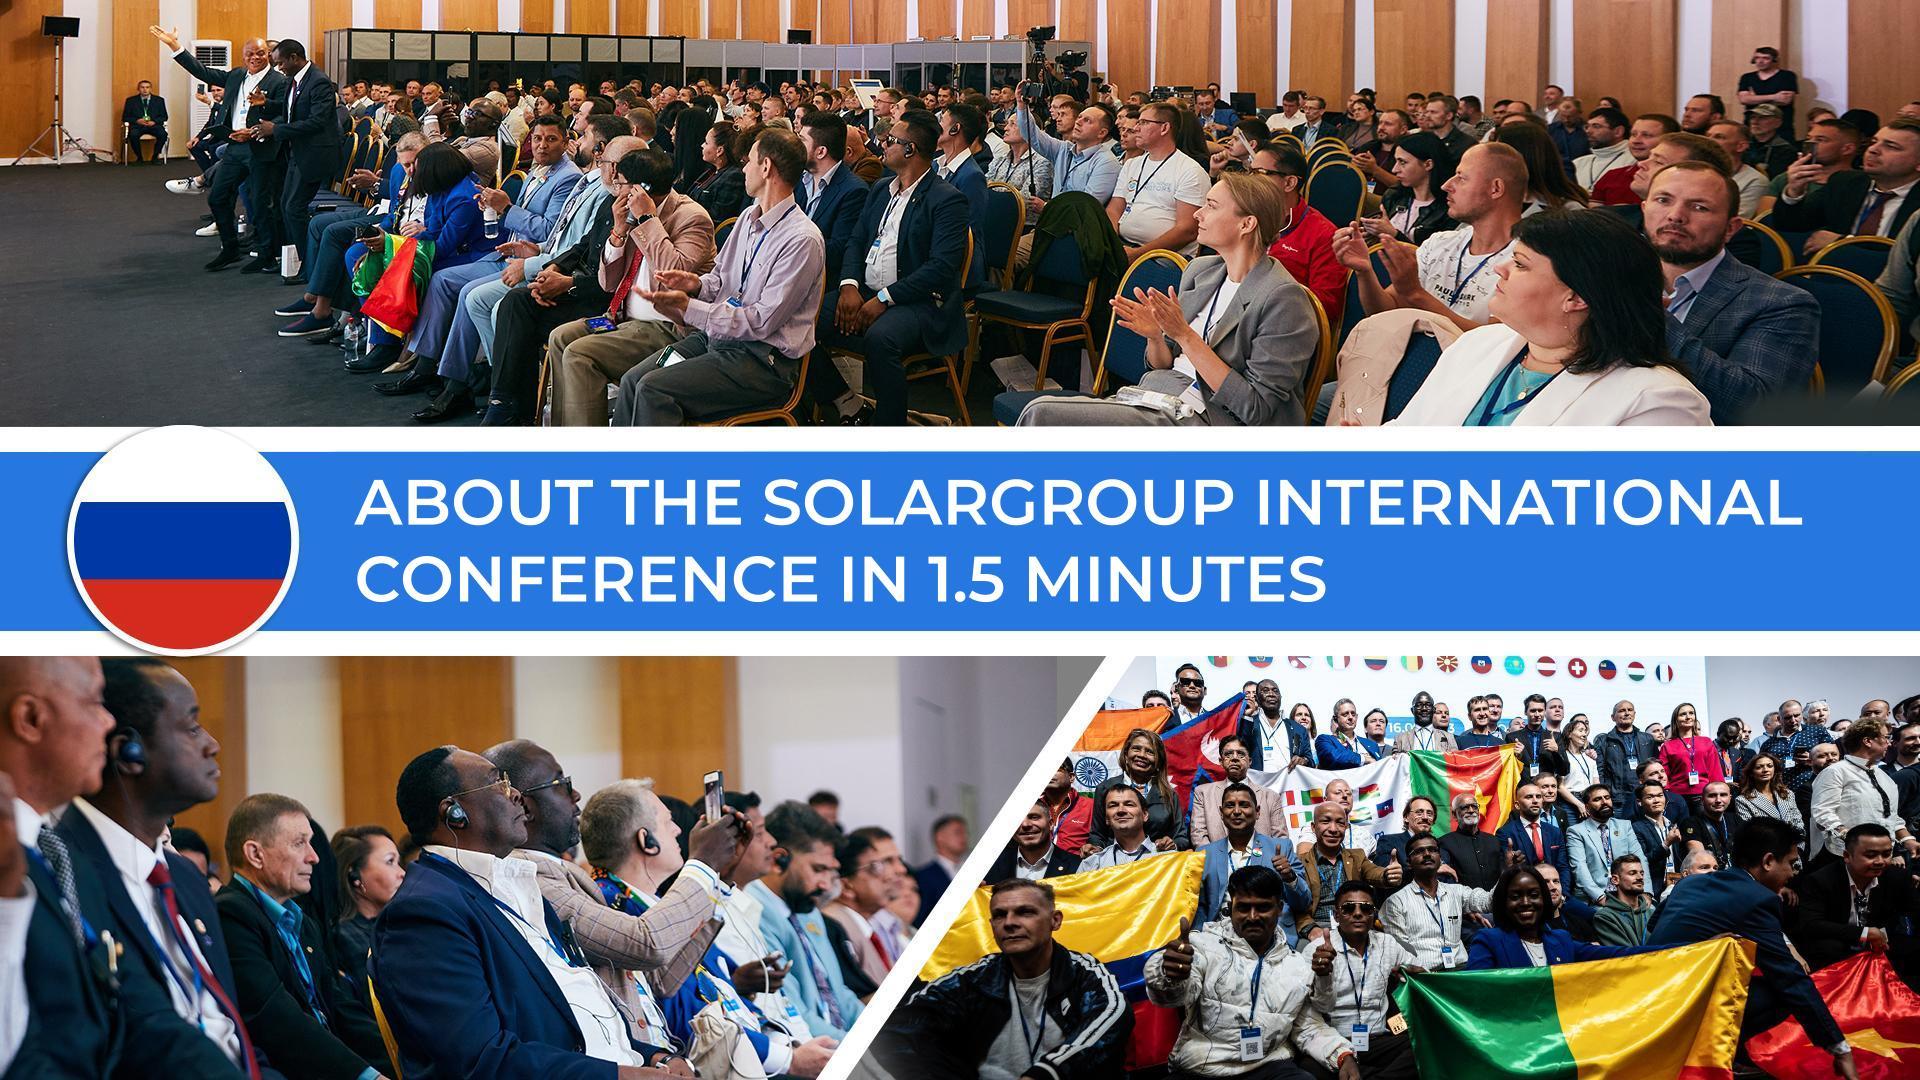 About the SOLARGROUP International Conference in 1.5 minutes